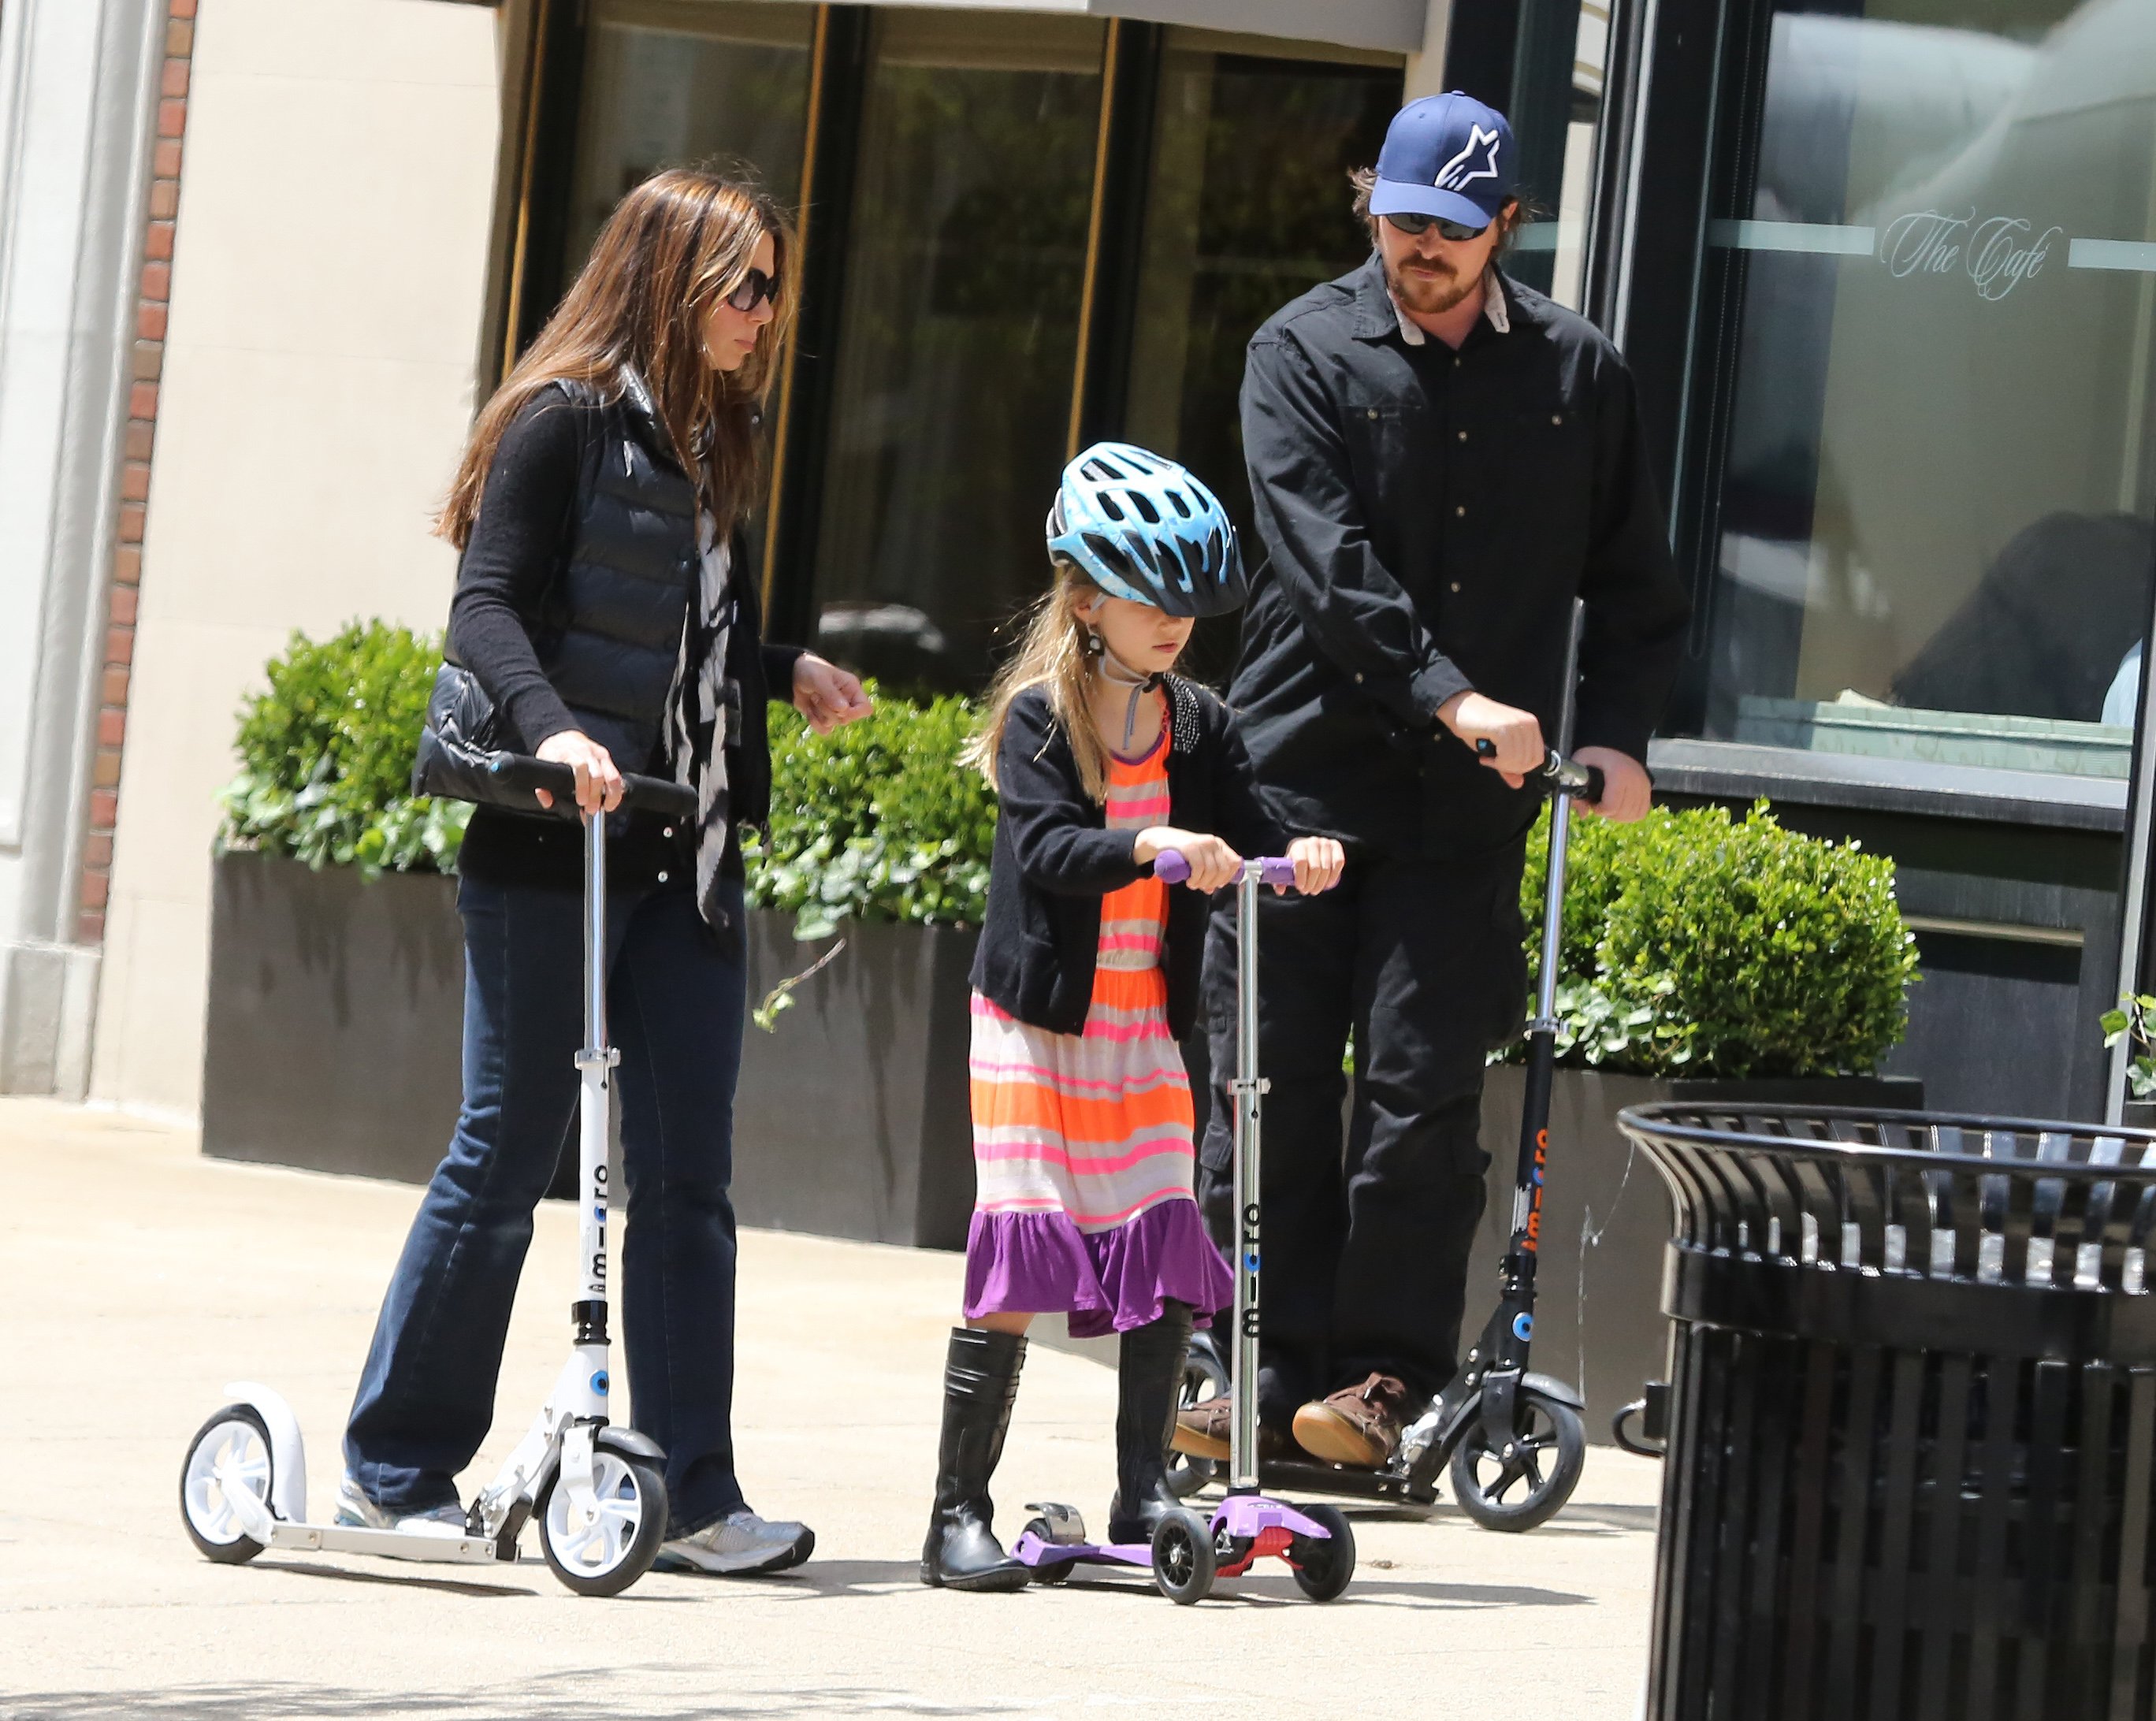 Christian Bale, Sibi Blažić, and Emmeline Bale on May 13, 2013 in Boston, Massachusetts | Source: Getty Images